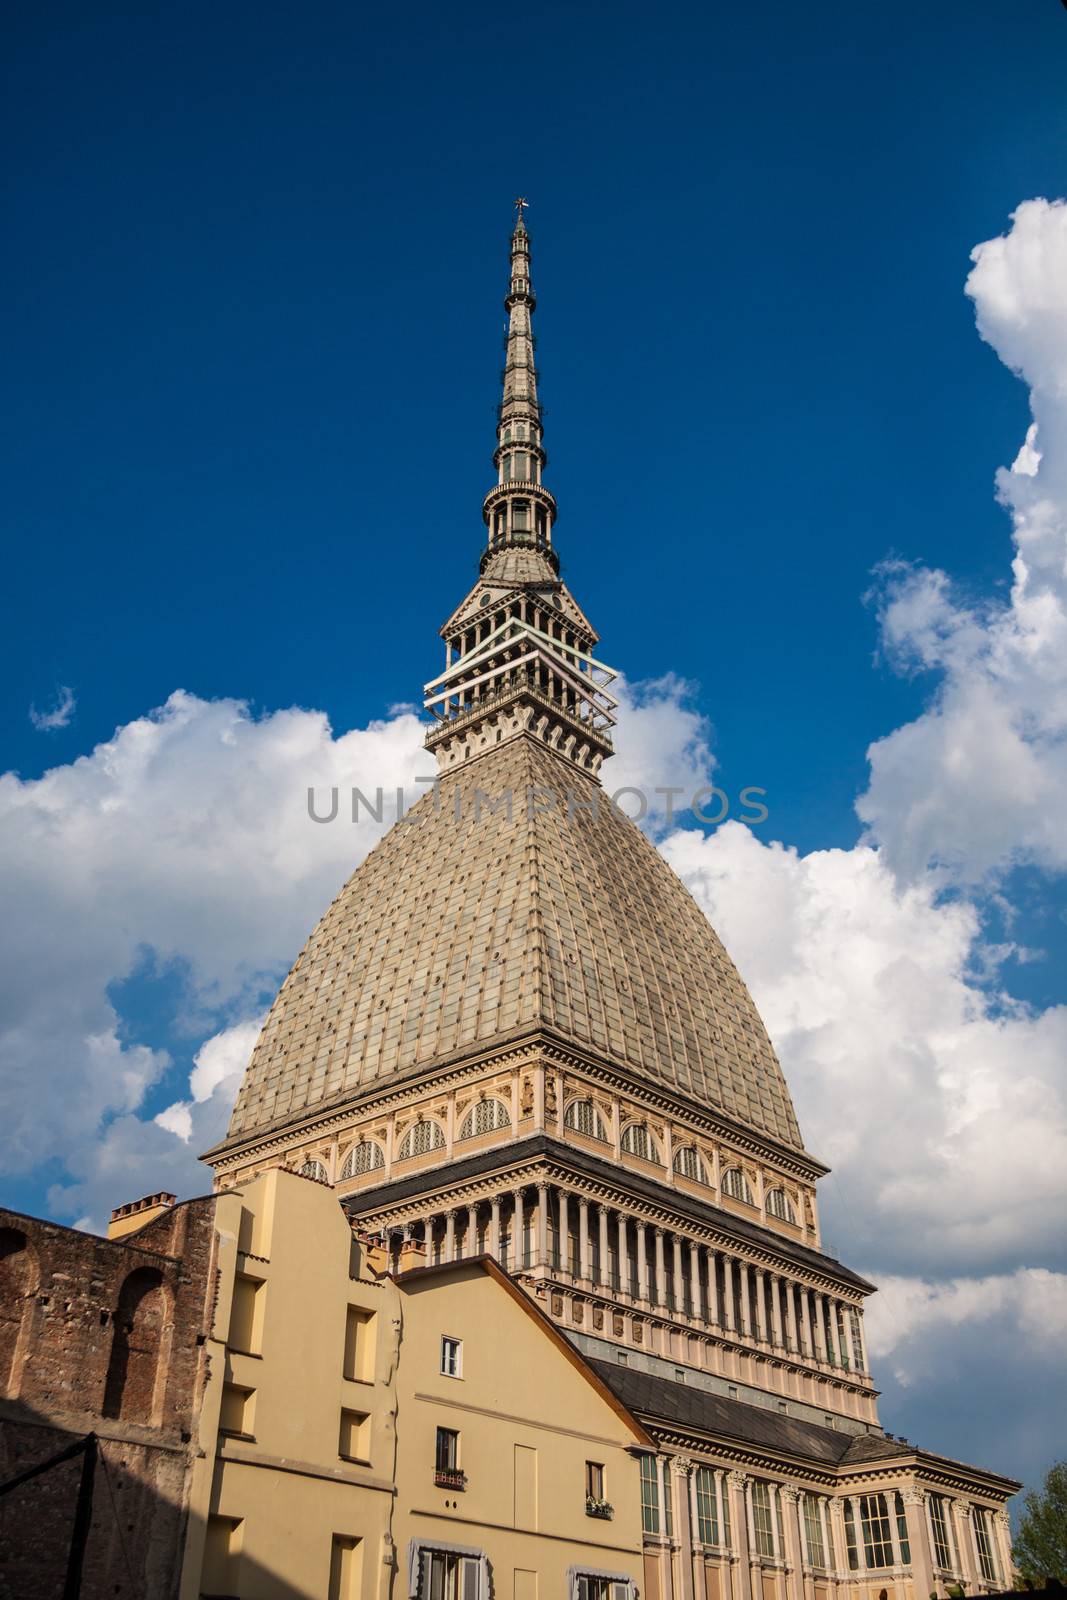 The Mole Antonelliana is a major landmark building in Turin, Italy. It is named for the architect who built it, Alessandro Antonelli. Originally conceived of as a synagogue, it now houses the National Cinema Museum.